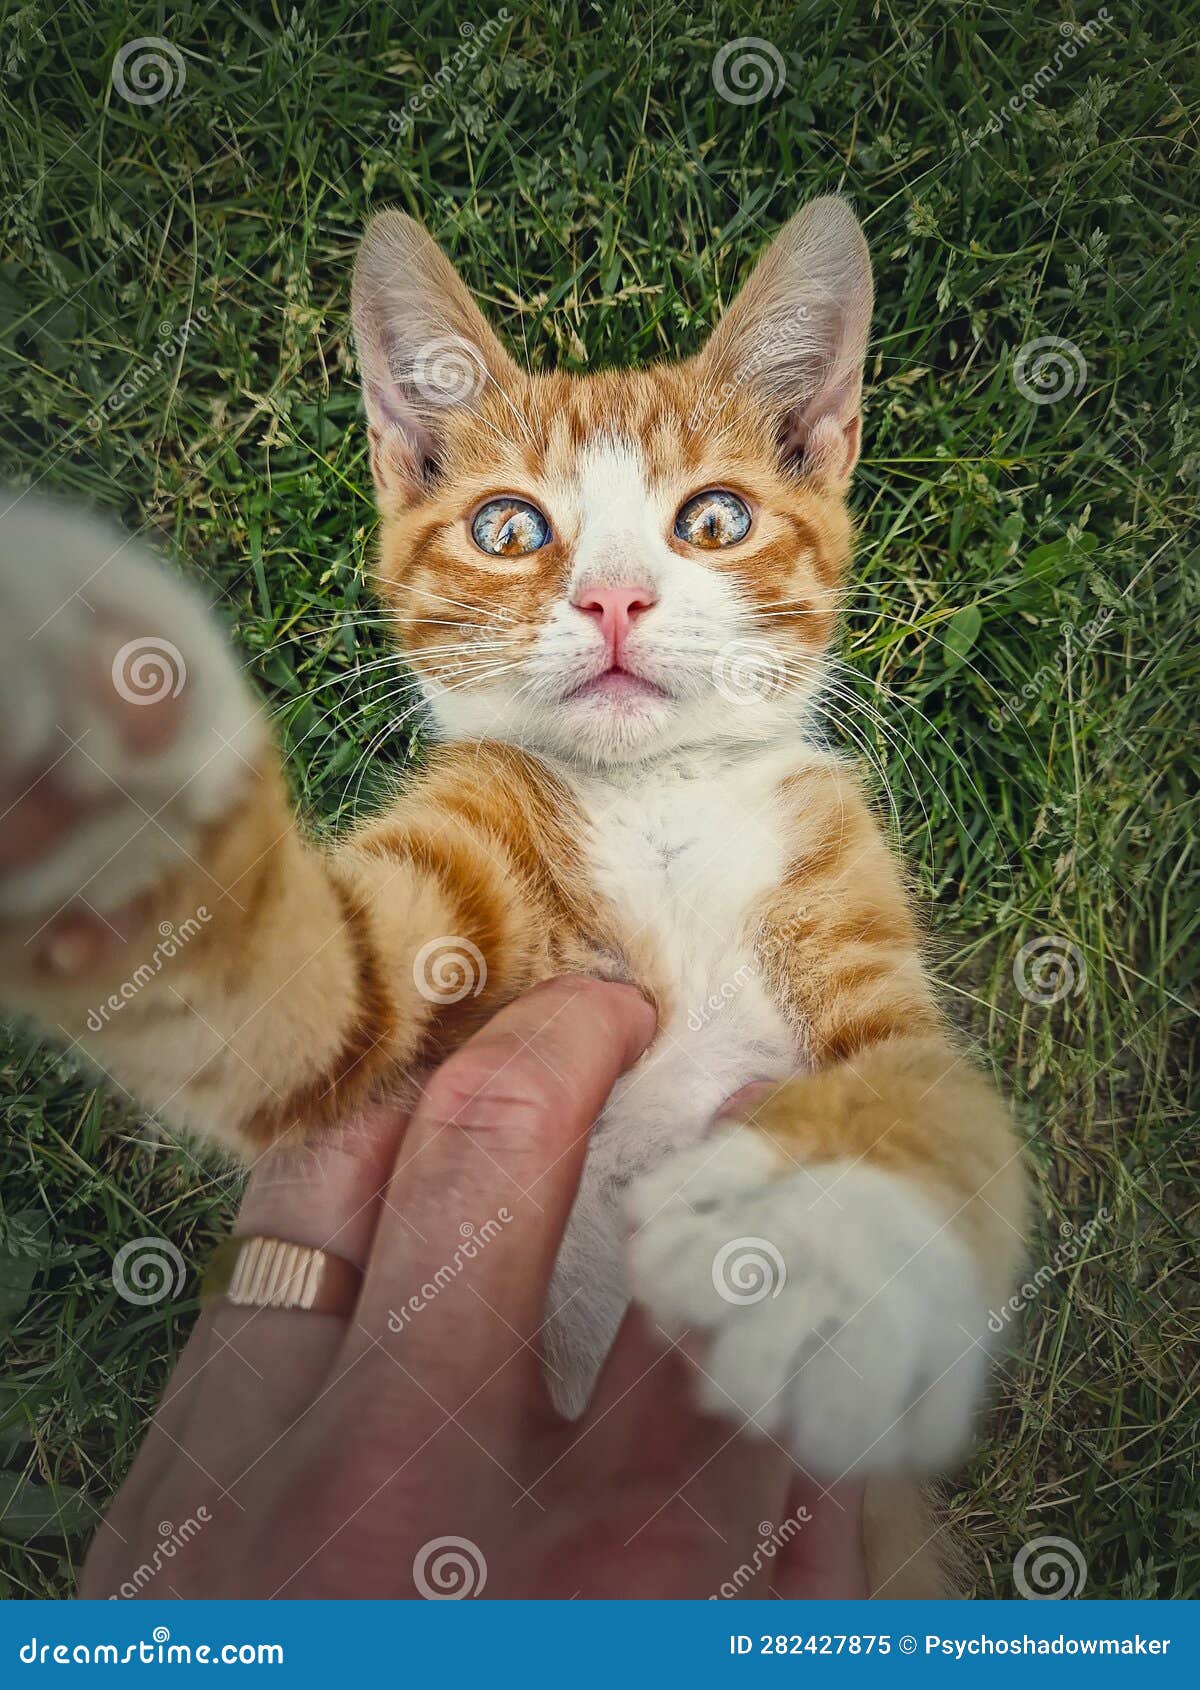 owner petting his orange tomcat. playful ginger cat lying on his back in the green grass. frisky kitten, cute caressing scene in